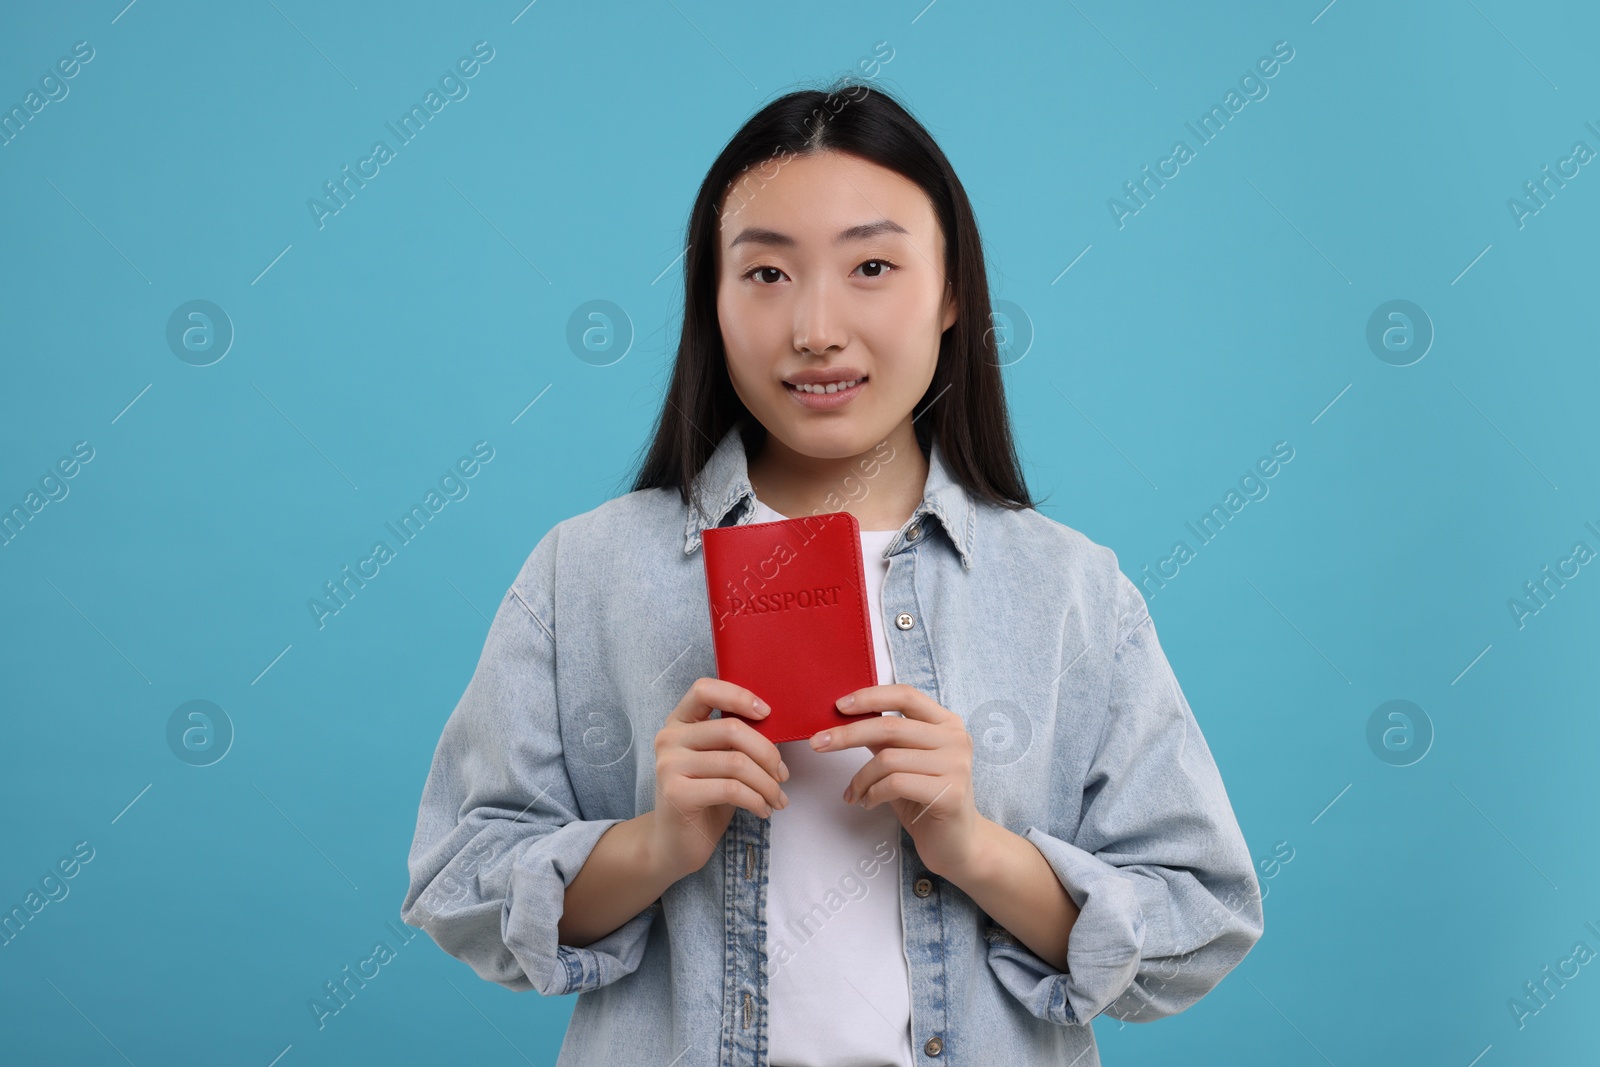 Photo of Immigration. Happy woman with passport on light blue background